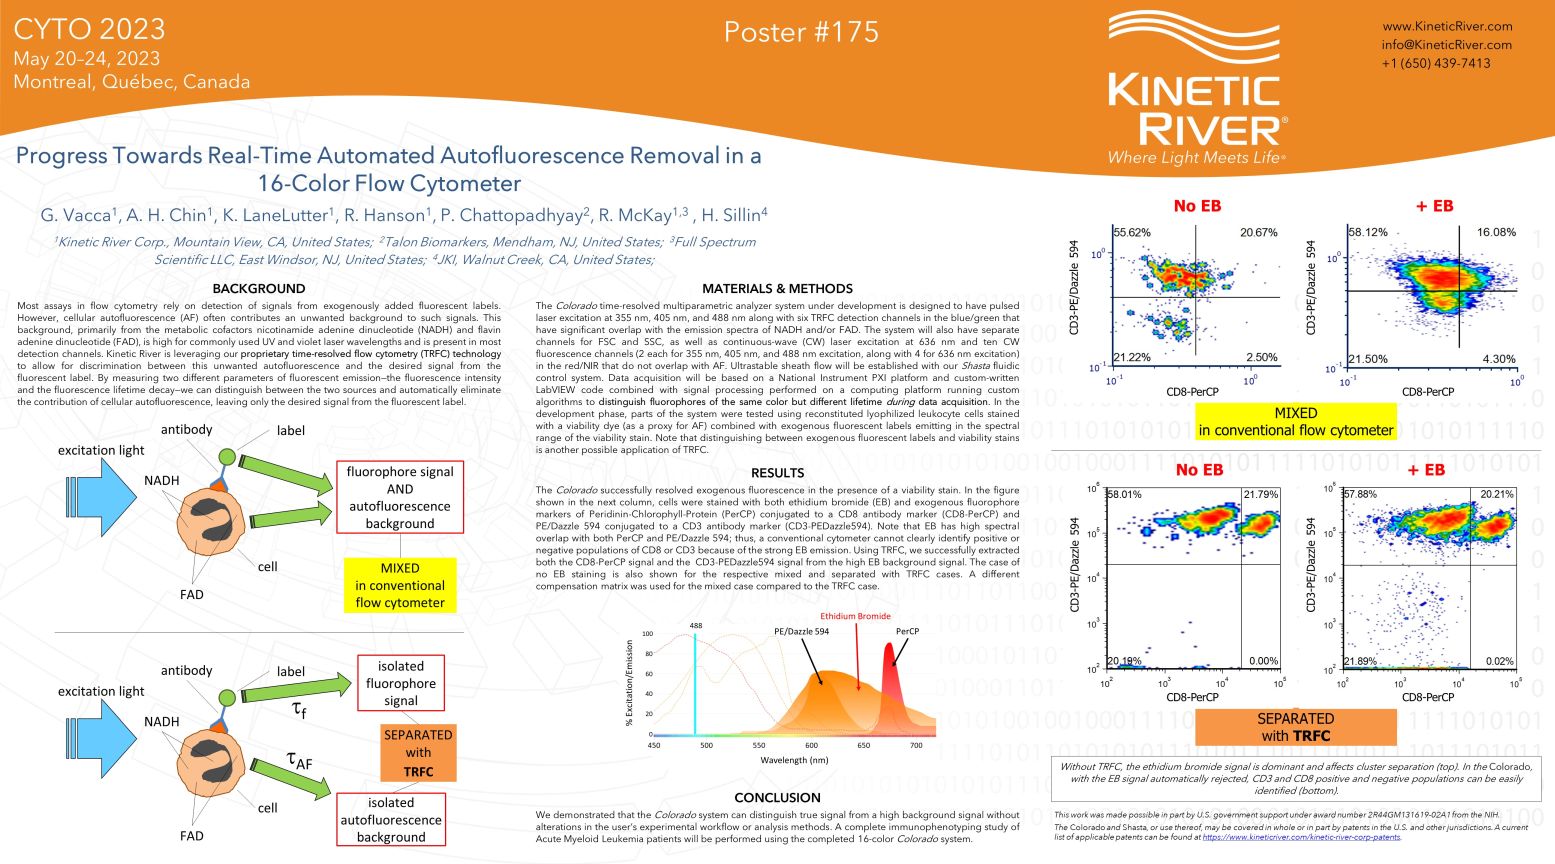 Kinetic River To Present Poster At CYTO On Automated Removal Of Cellular Autofluorescence